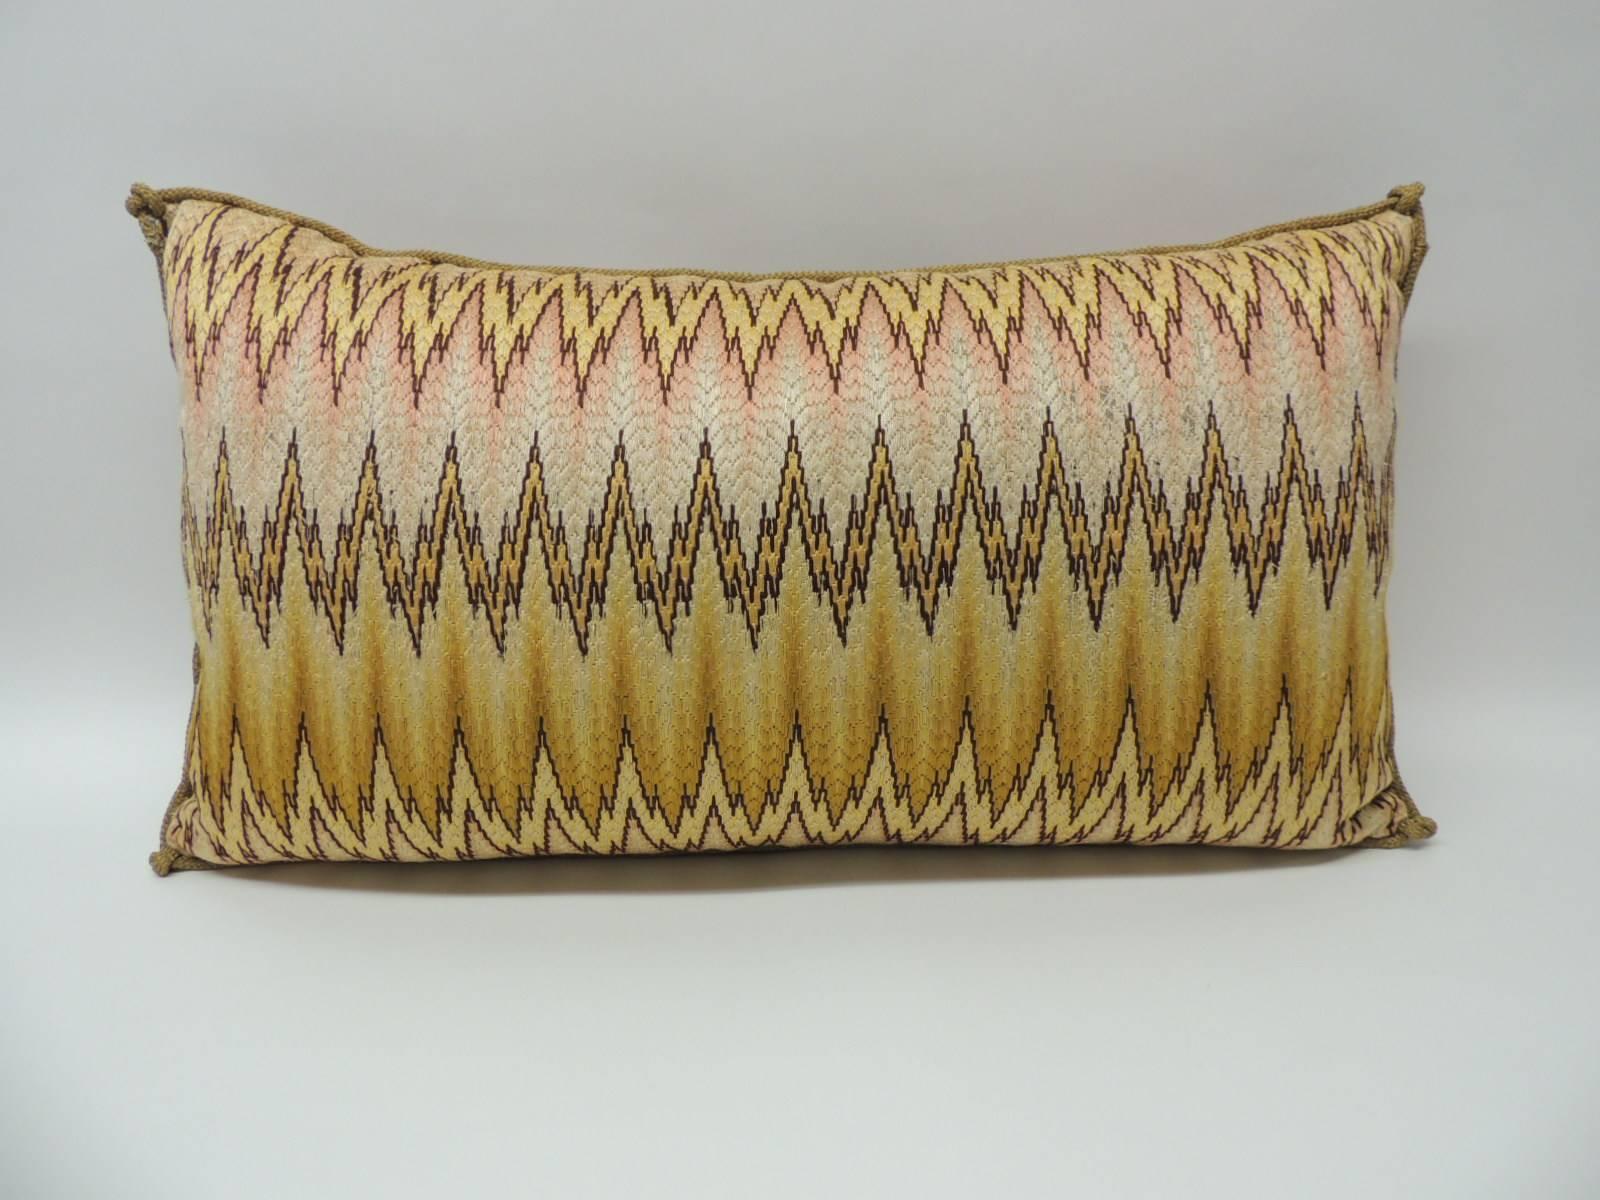 Large 19th century Italian Bargello embroidery bolster decorative pillow with antique rope trim all around: “This historic pattern originally worked in silk may be seen on 17th century chairs at the Bargello Museum in Florence, Italy.”  The large